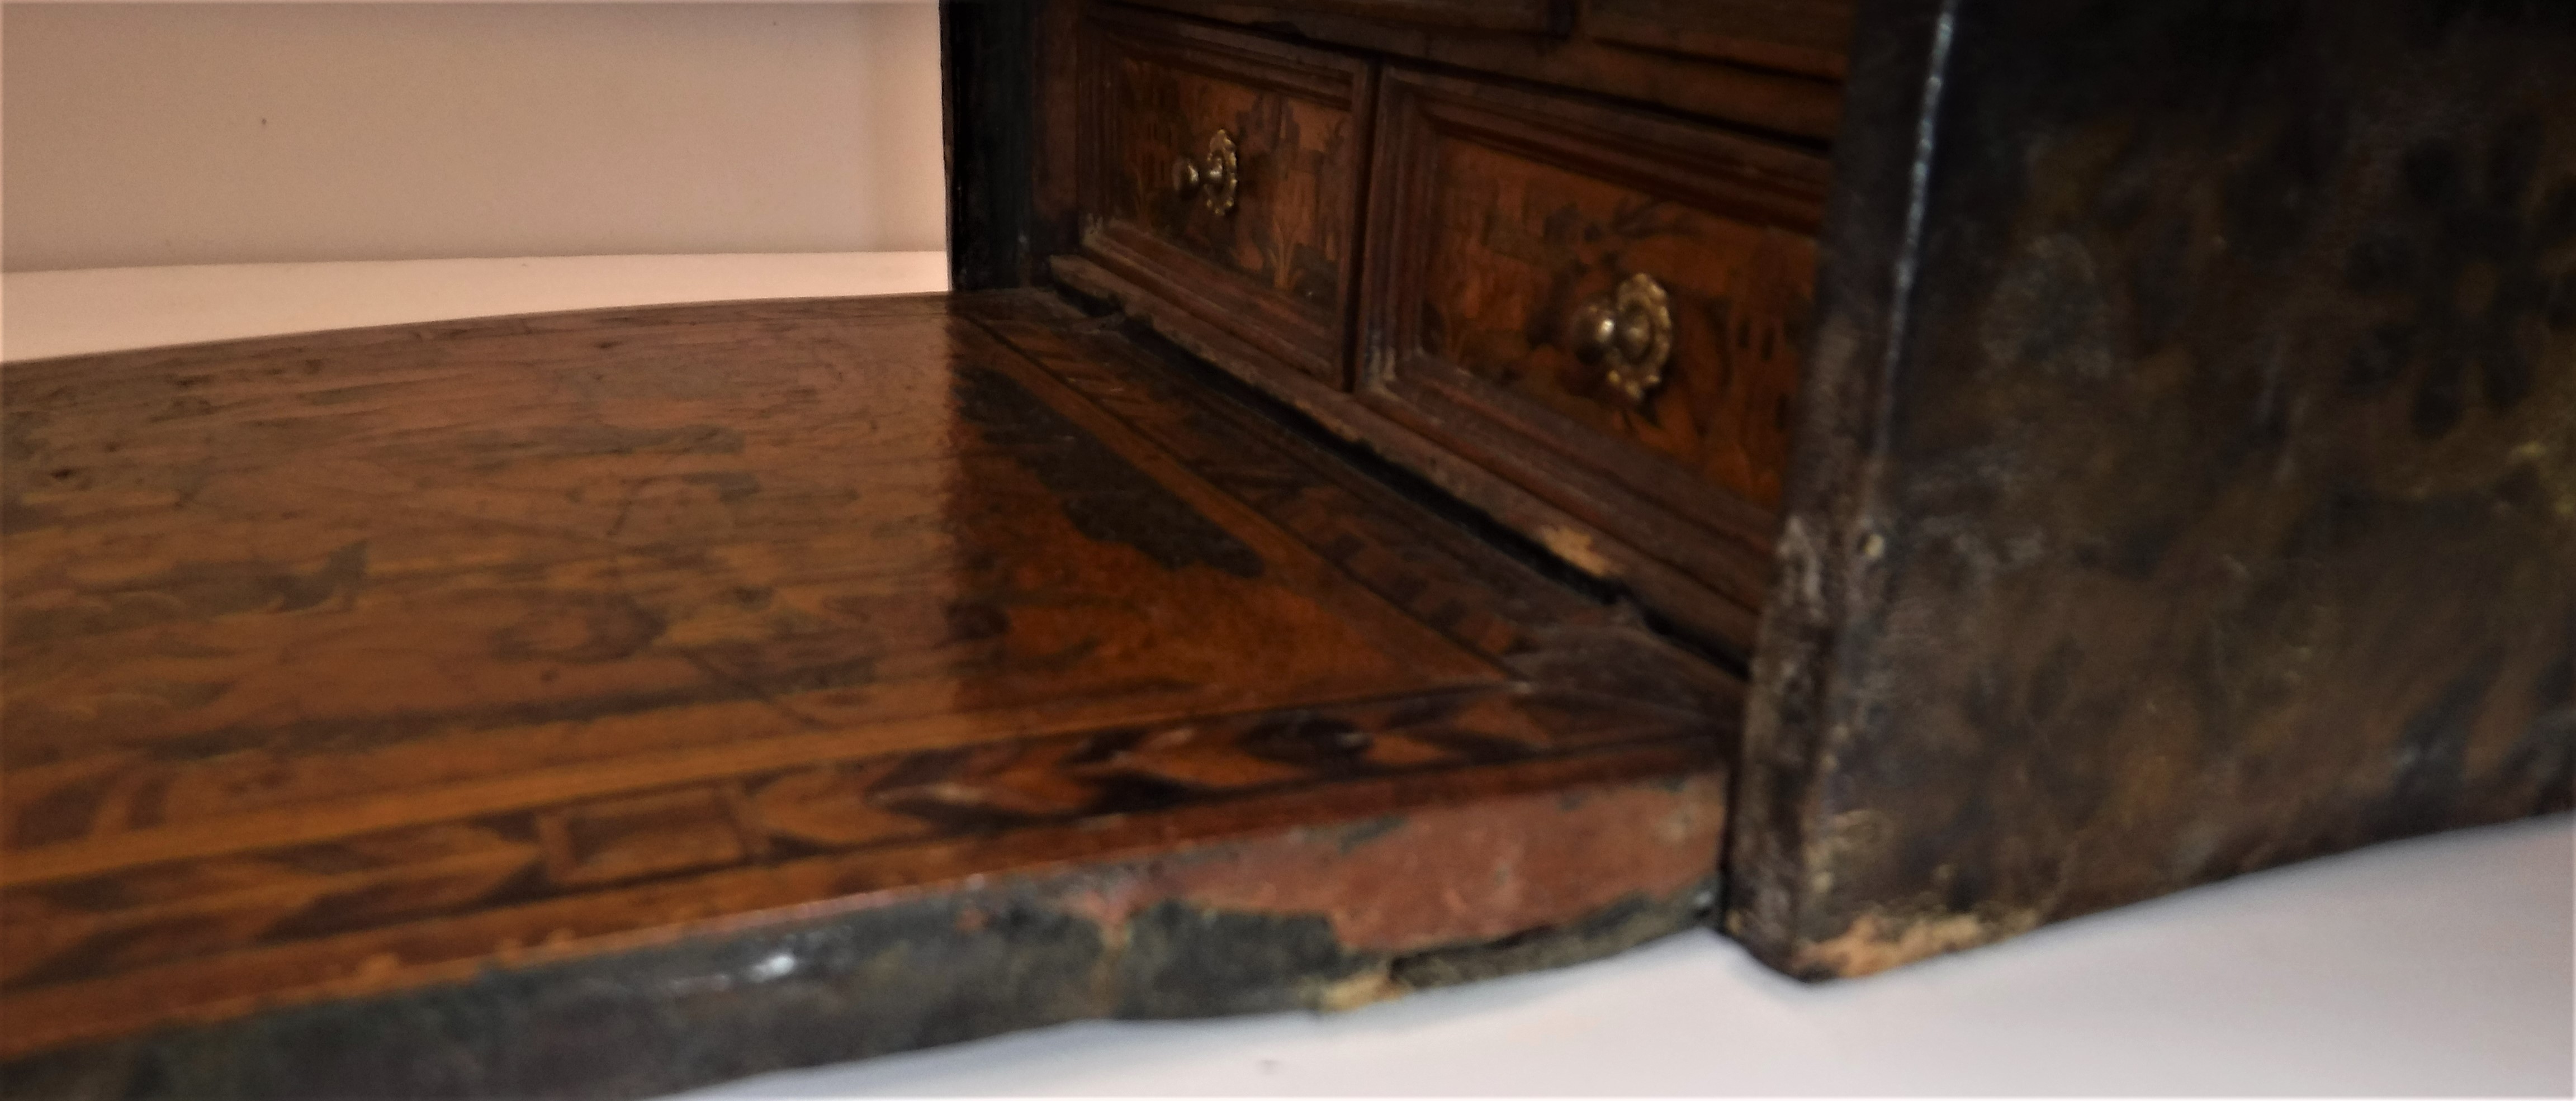 A 17th Century Augsburg table-top or tra - Image 13 of 42